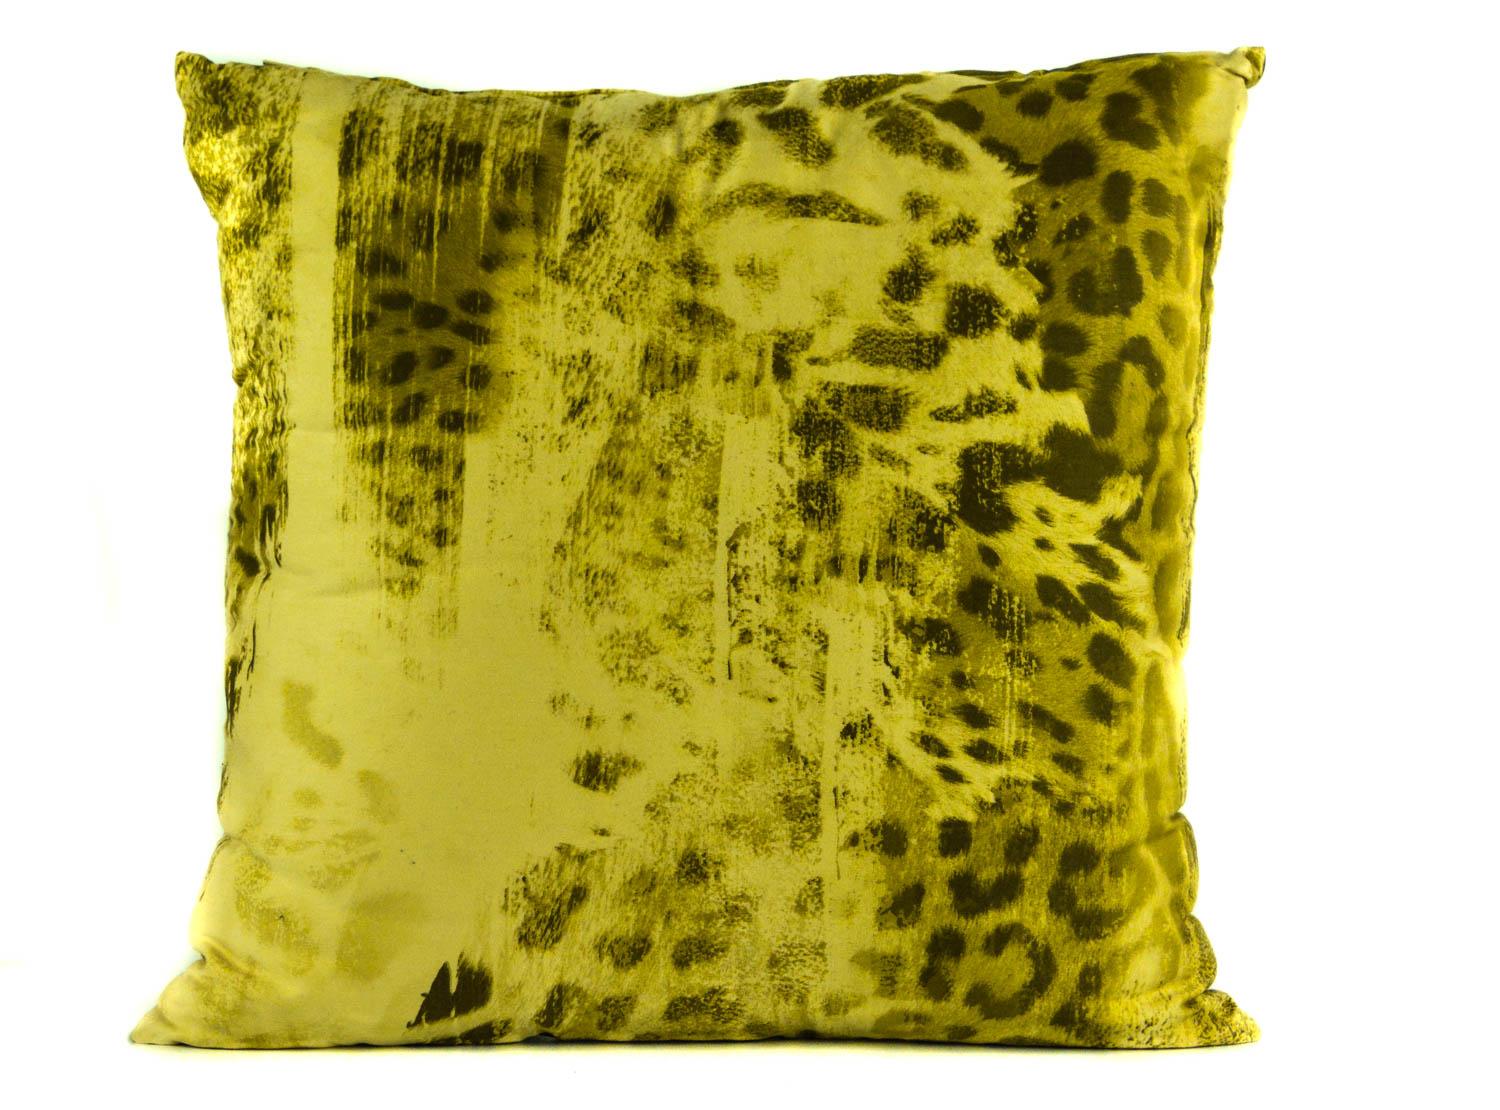 Bring a touch of elegance to your living space with this beautiful leopard print pattern cushion by Roberto Cavalli. Elegance and chic style are displayed beautifully throughout the Roberto Cavalli Home collection. With luxuriously soft silk,